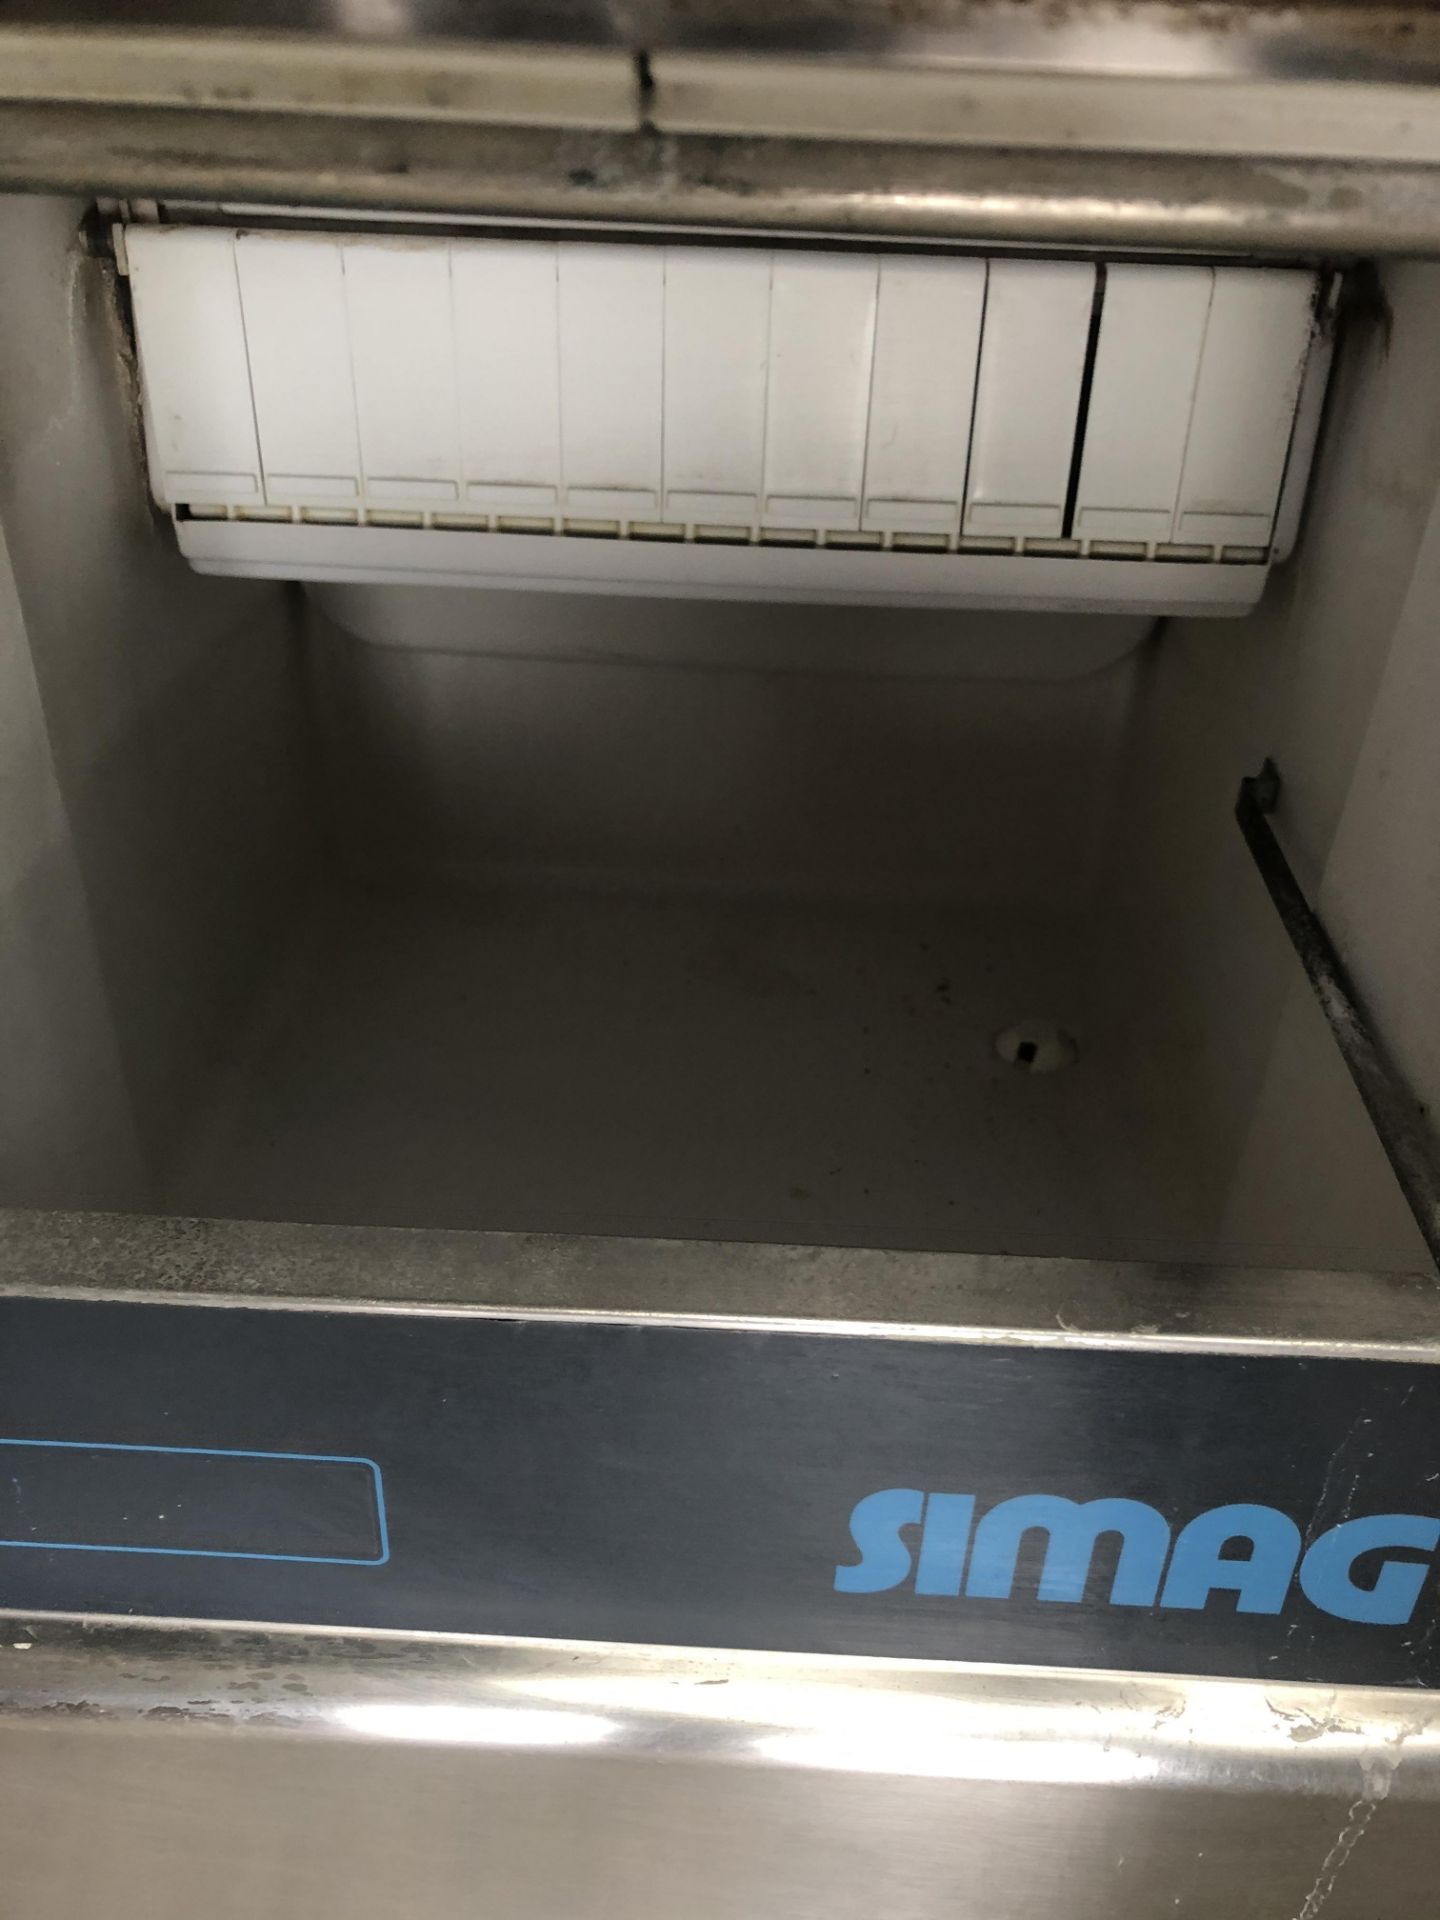 Simag Ice Maker - Image 2 of 2